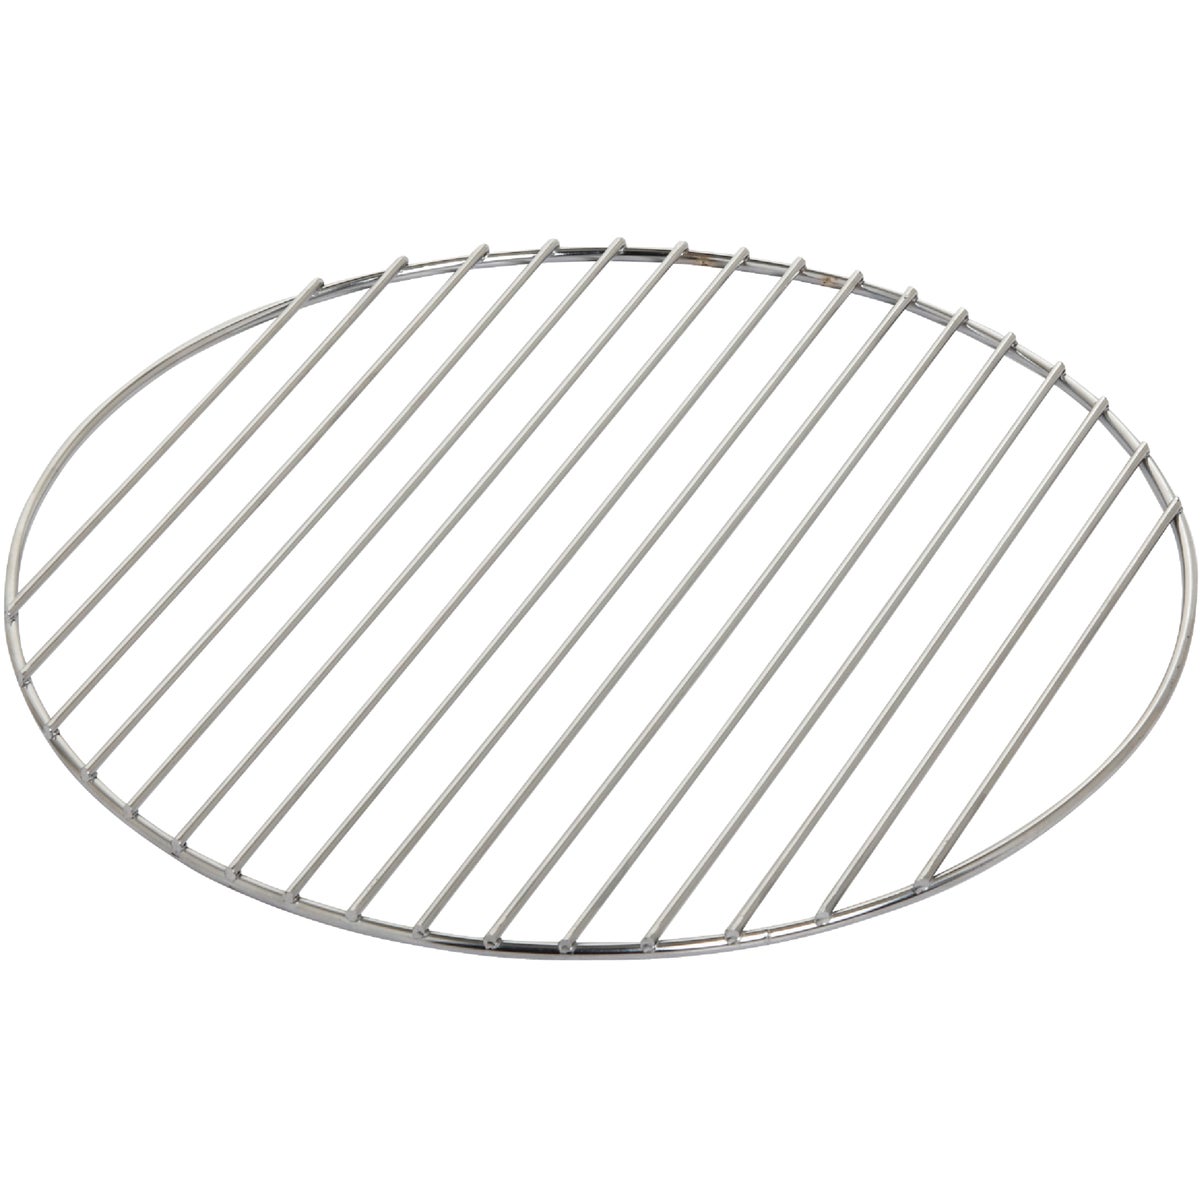 Item 800528, Top replacement grill grate for Old Smokey charcoal grills.